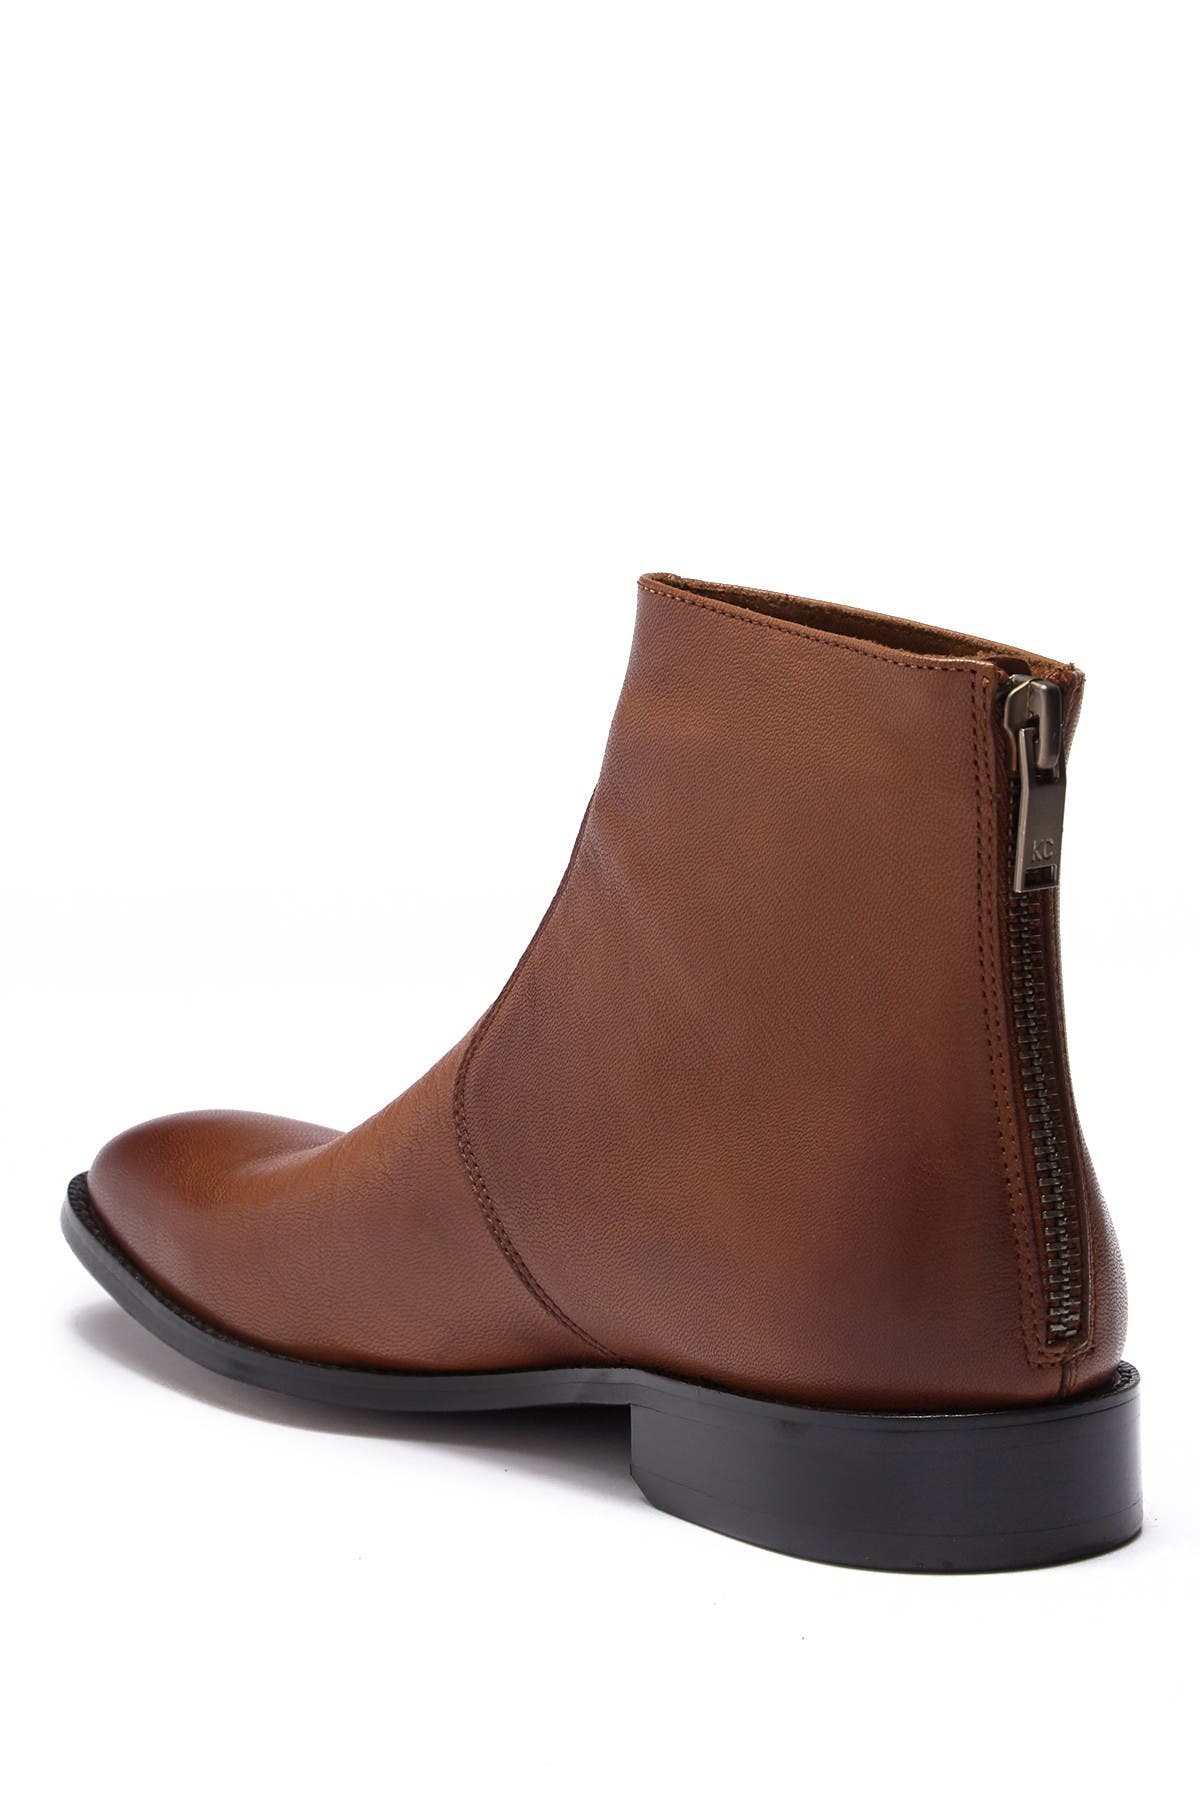 KENNETH COLE | Leather Zip-Up Boot 